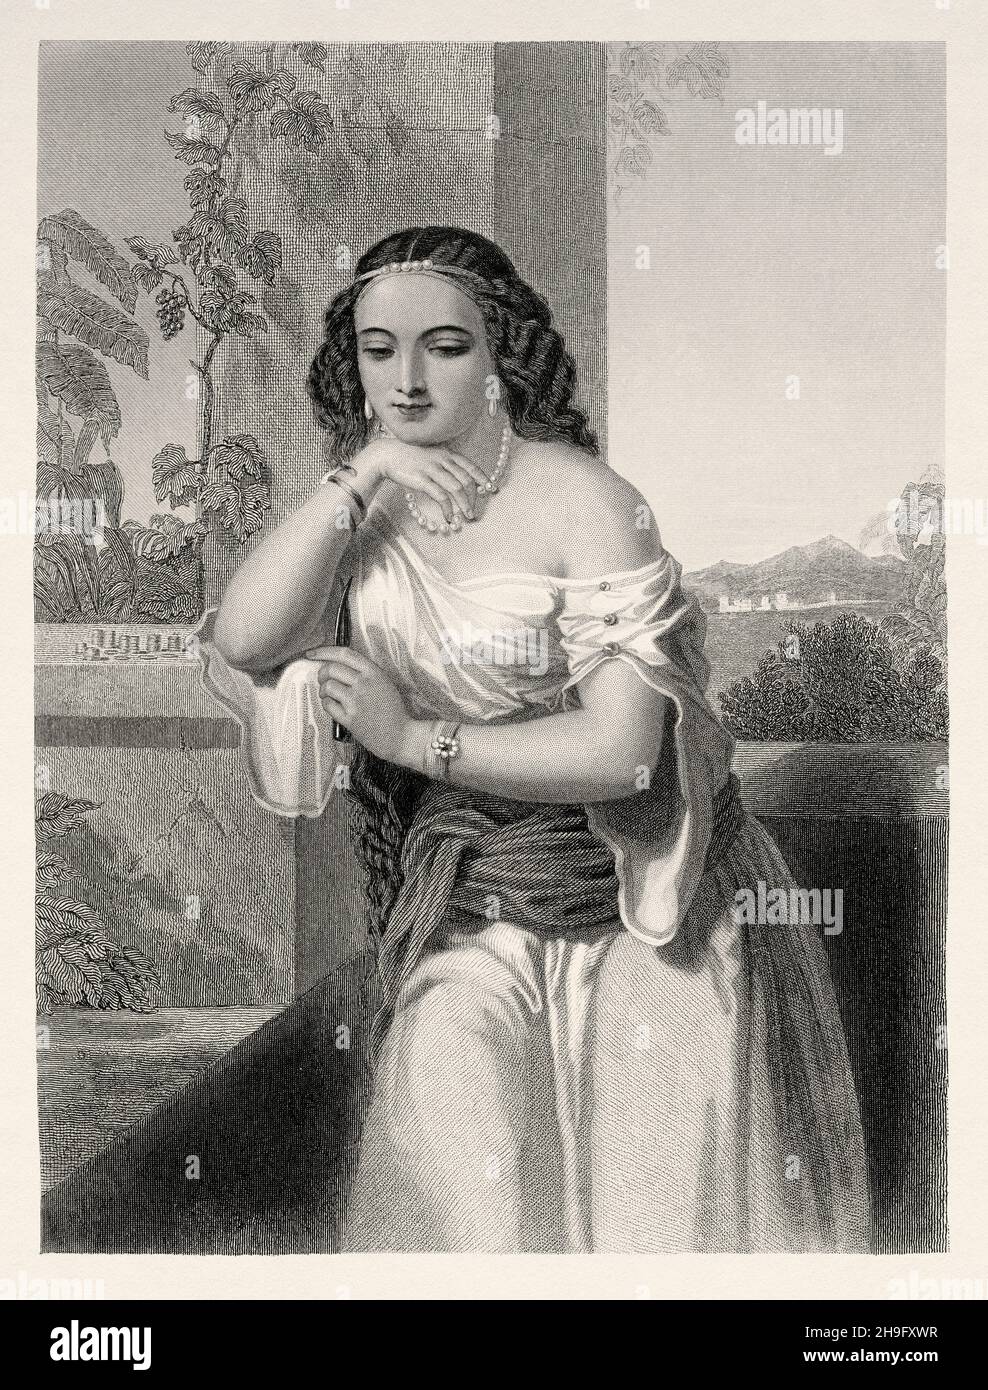 Delilah, Philistine of the Valley of Sorec, Samson's mistress, judge of Israel. She bribed by the Philistines, she sold Samson, cut off her hair while she slept and they were able to capture him. Old 19th century engraved illustration from Mugeres de la Biblia by Joaquin Roca y Cornet 1862 Stock Photo